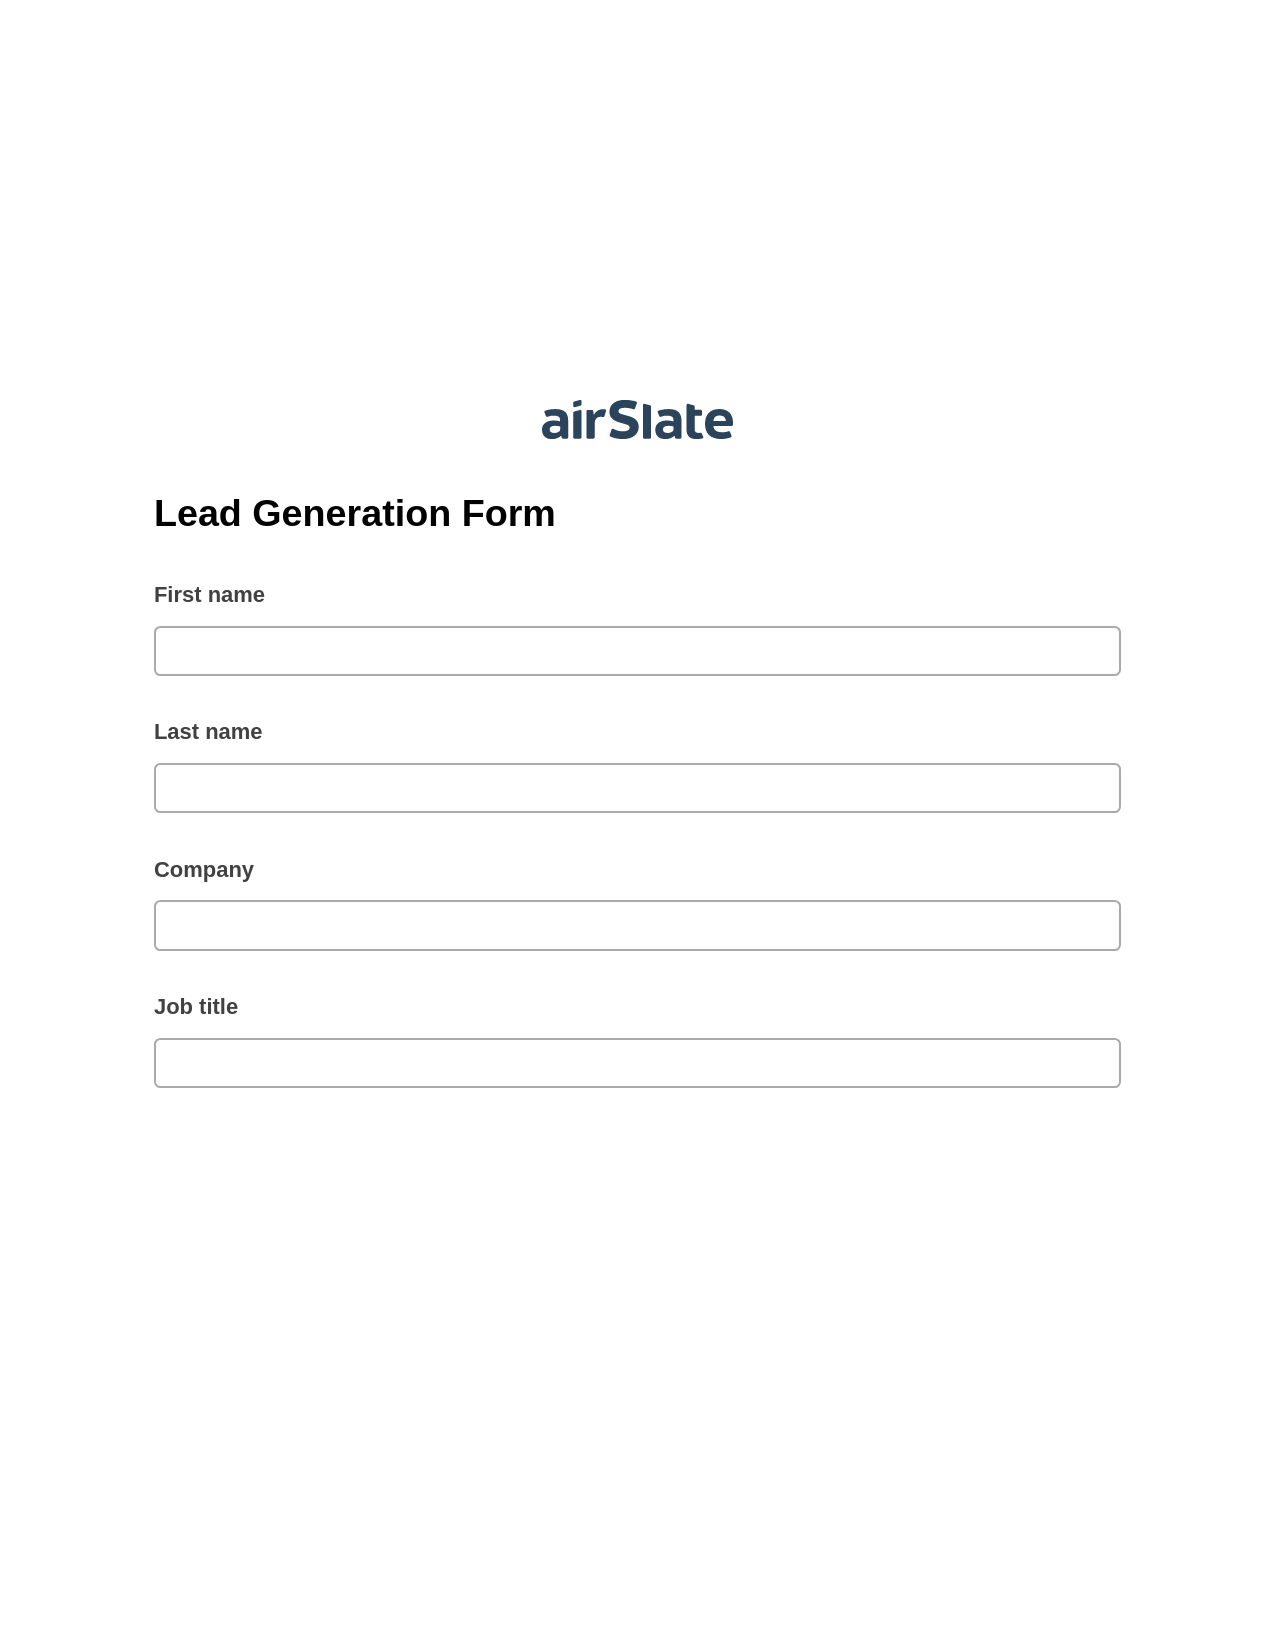 Lead Generation Form Pre-fill from another Slate Bot, Add Tags to Slate Bot, Export to NetSuite Bot